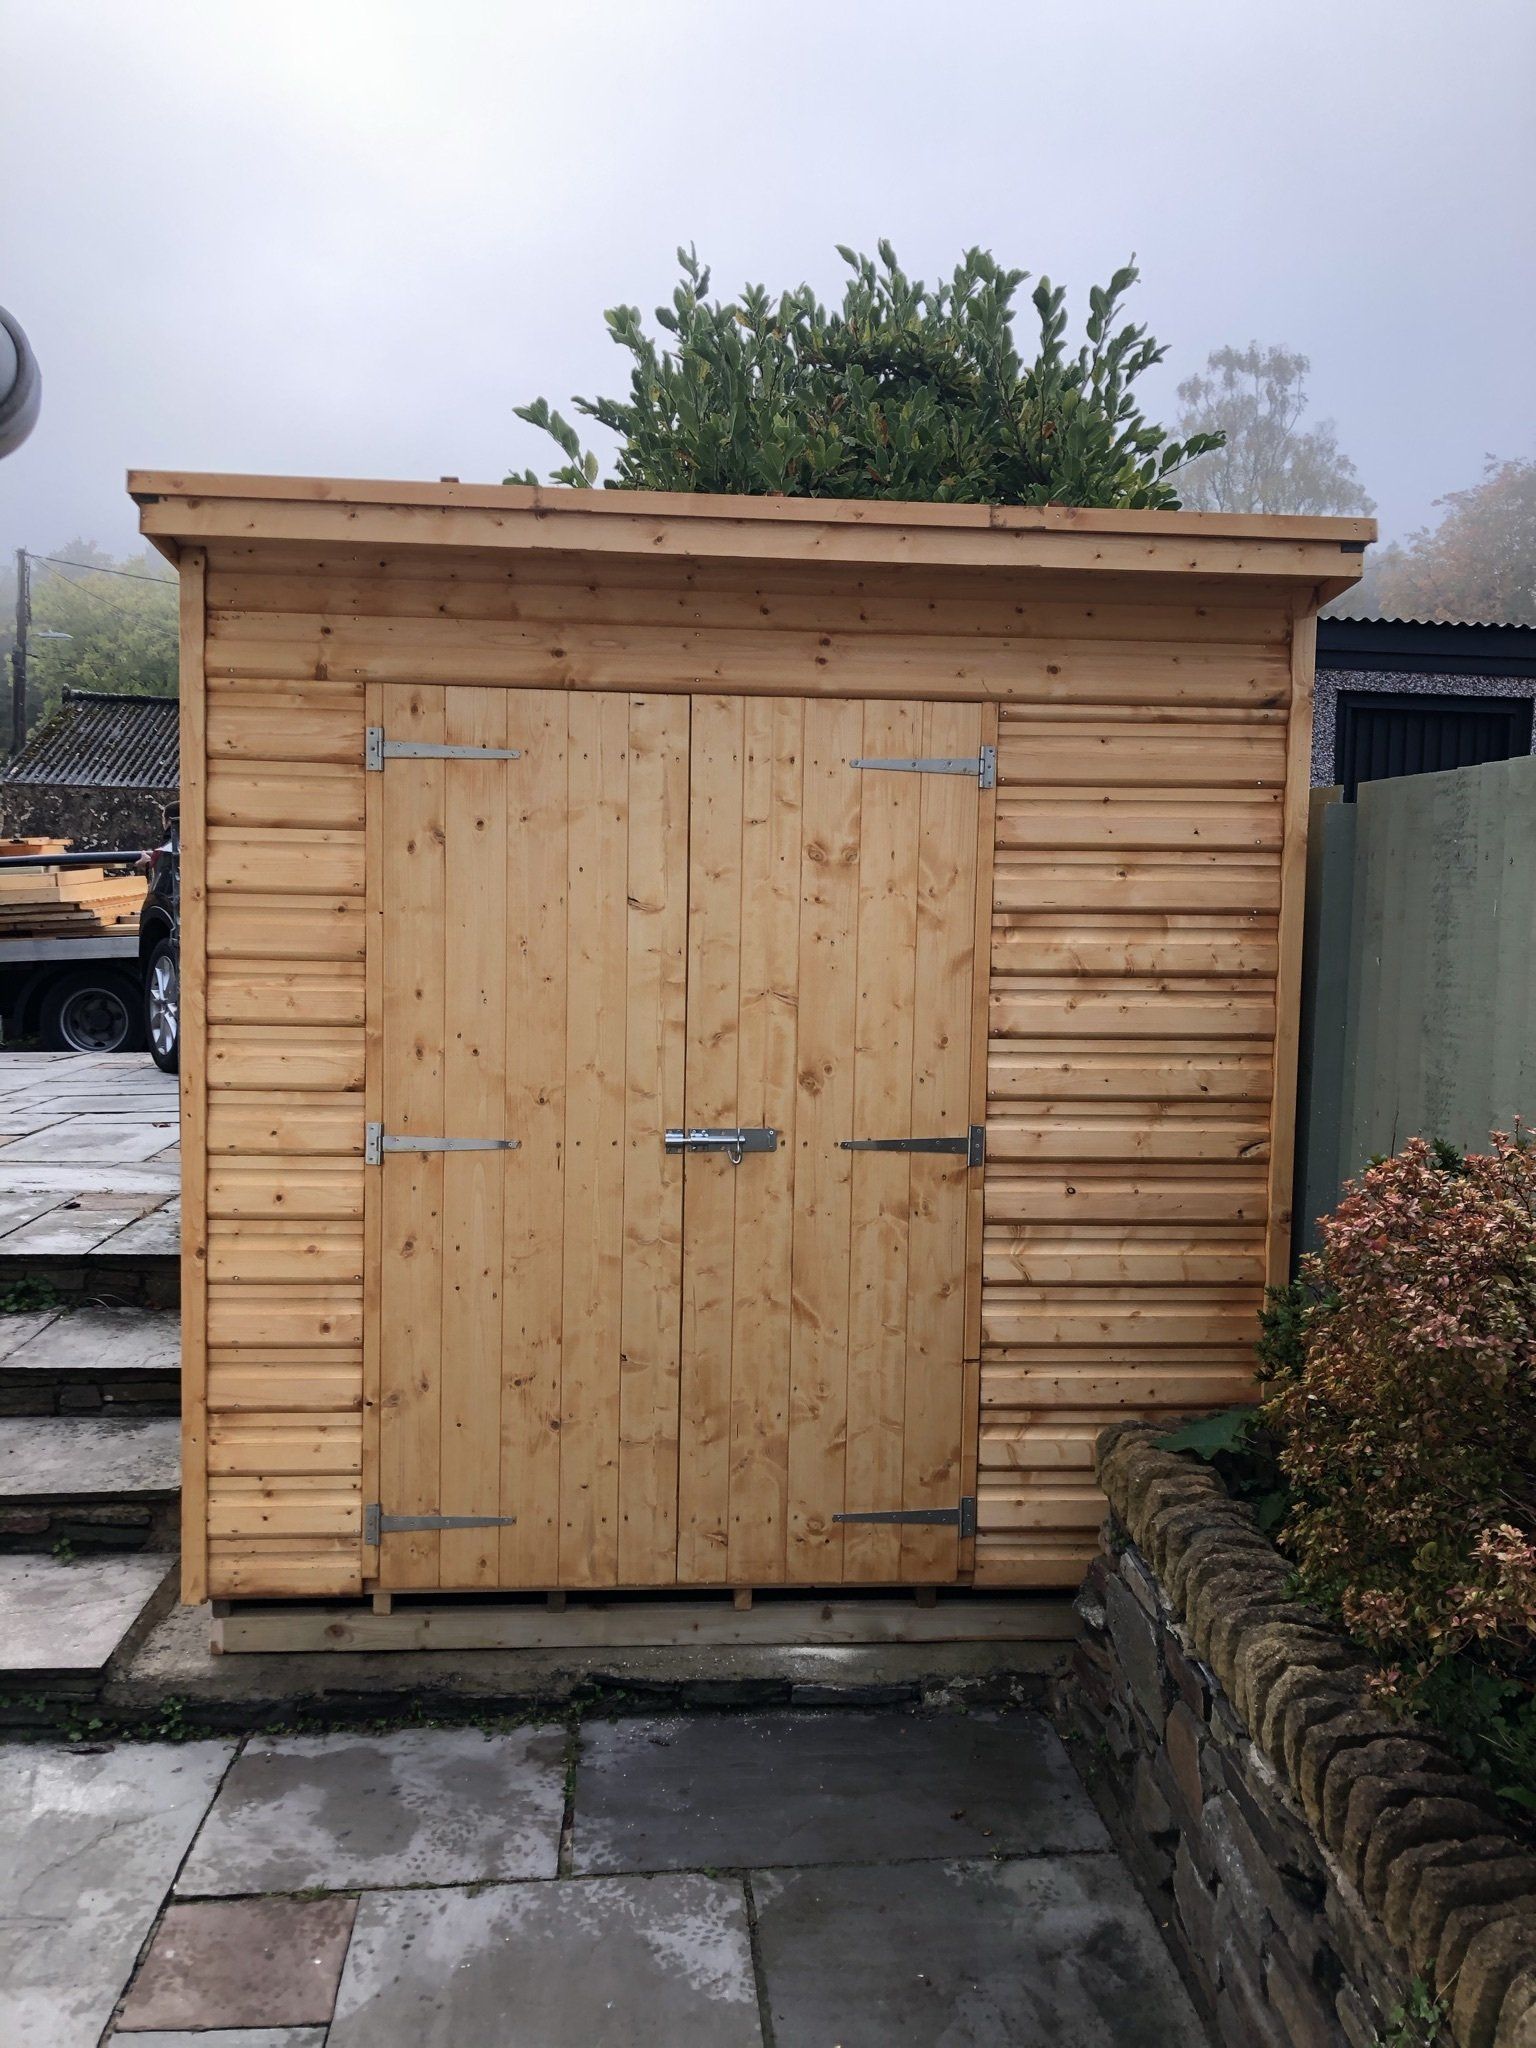 Shed height storage with double doors.